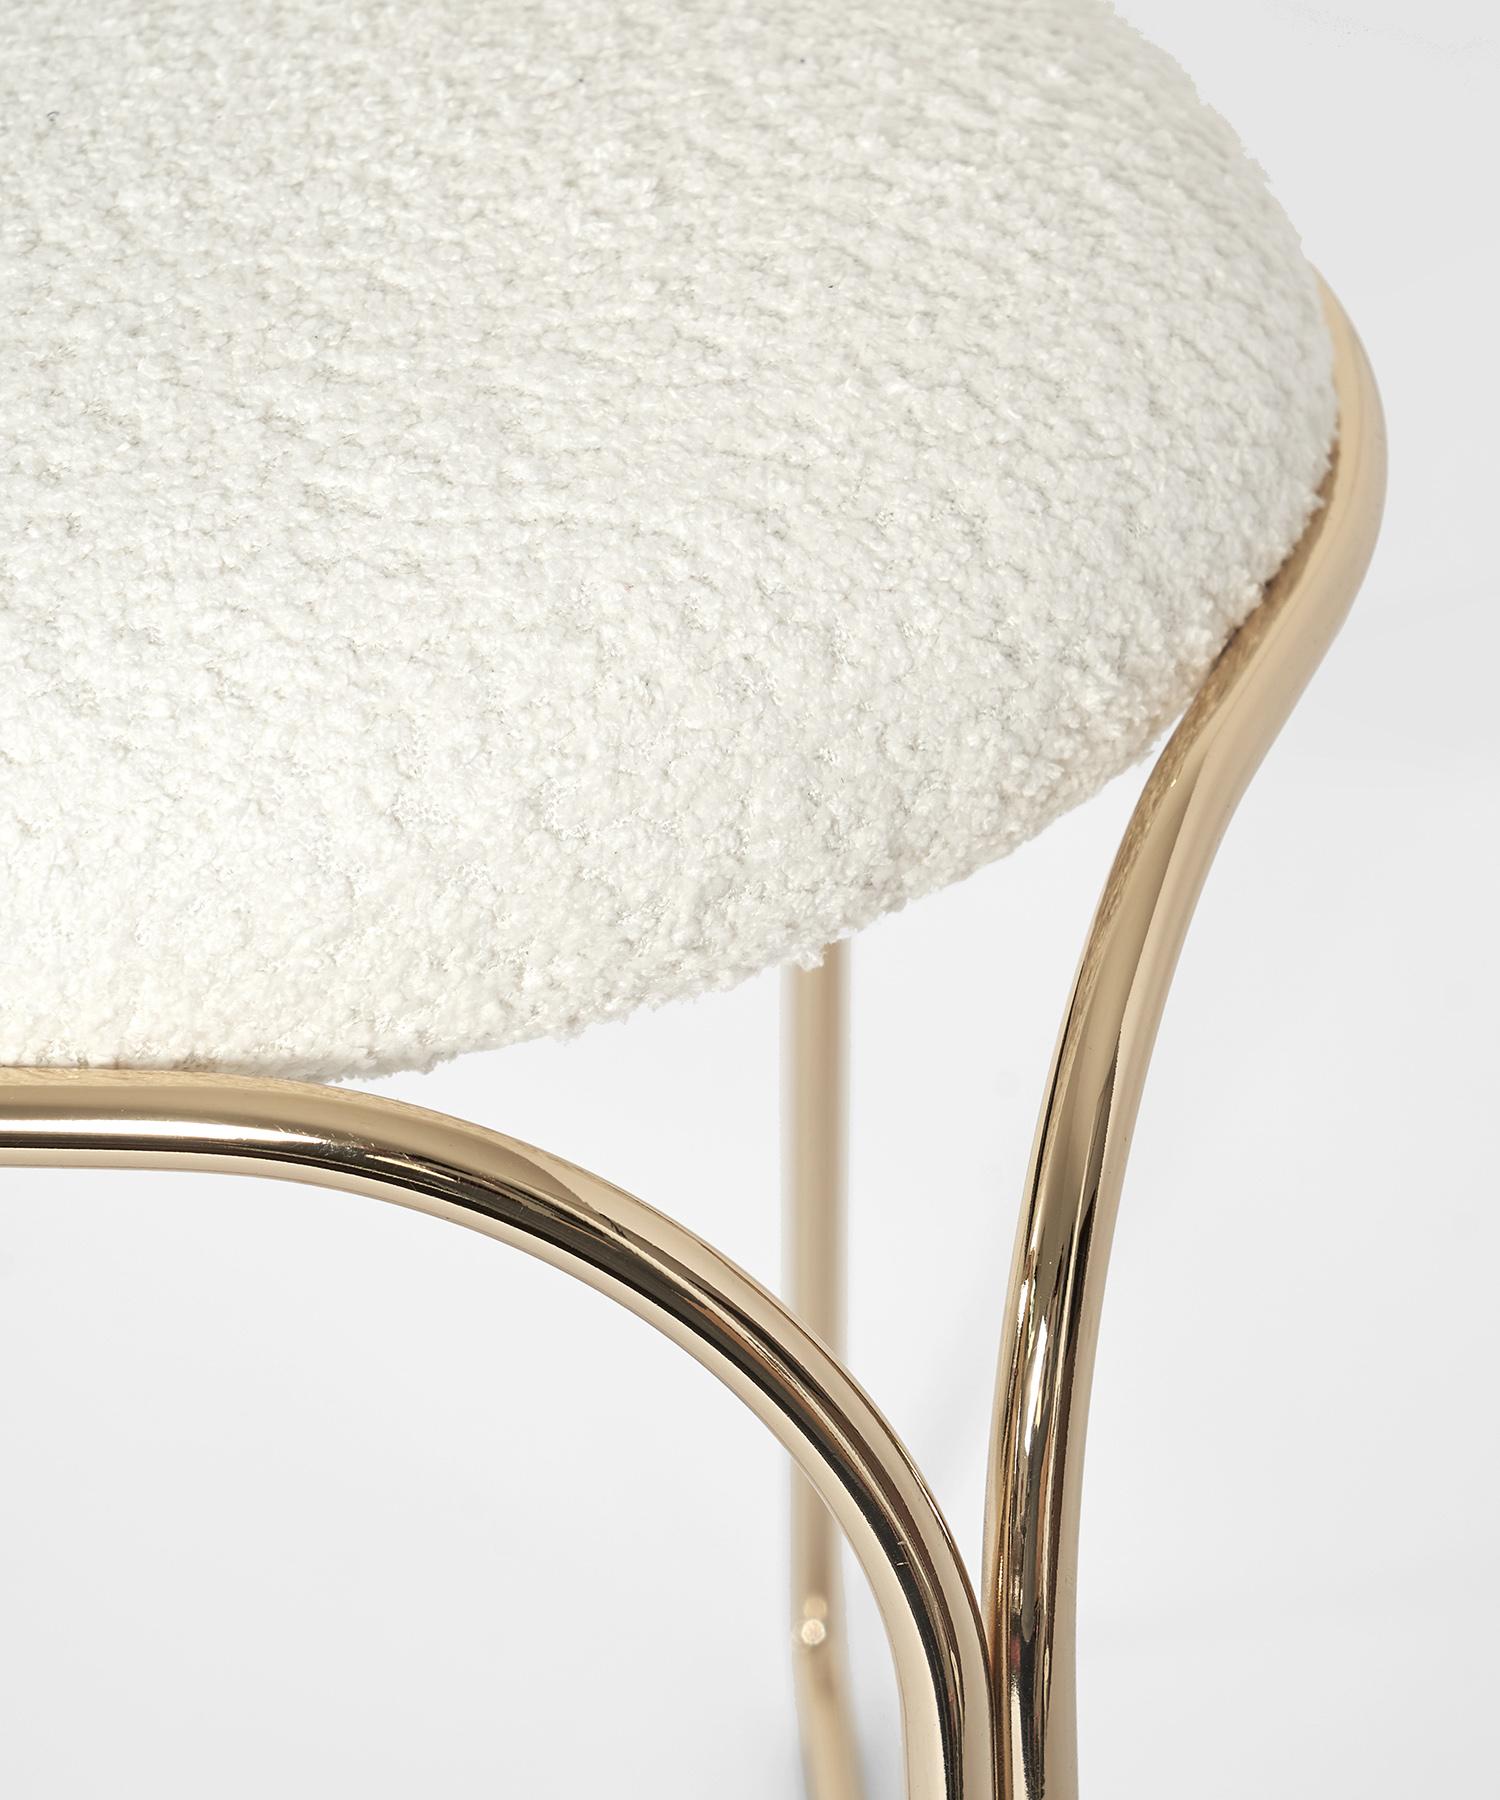 Minimalist Flow Gold Contemporary High Stool by Enrico Girotti Made in Italy by lapiegaWD For Sale